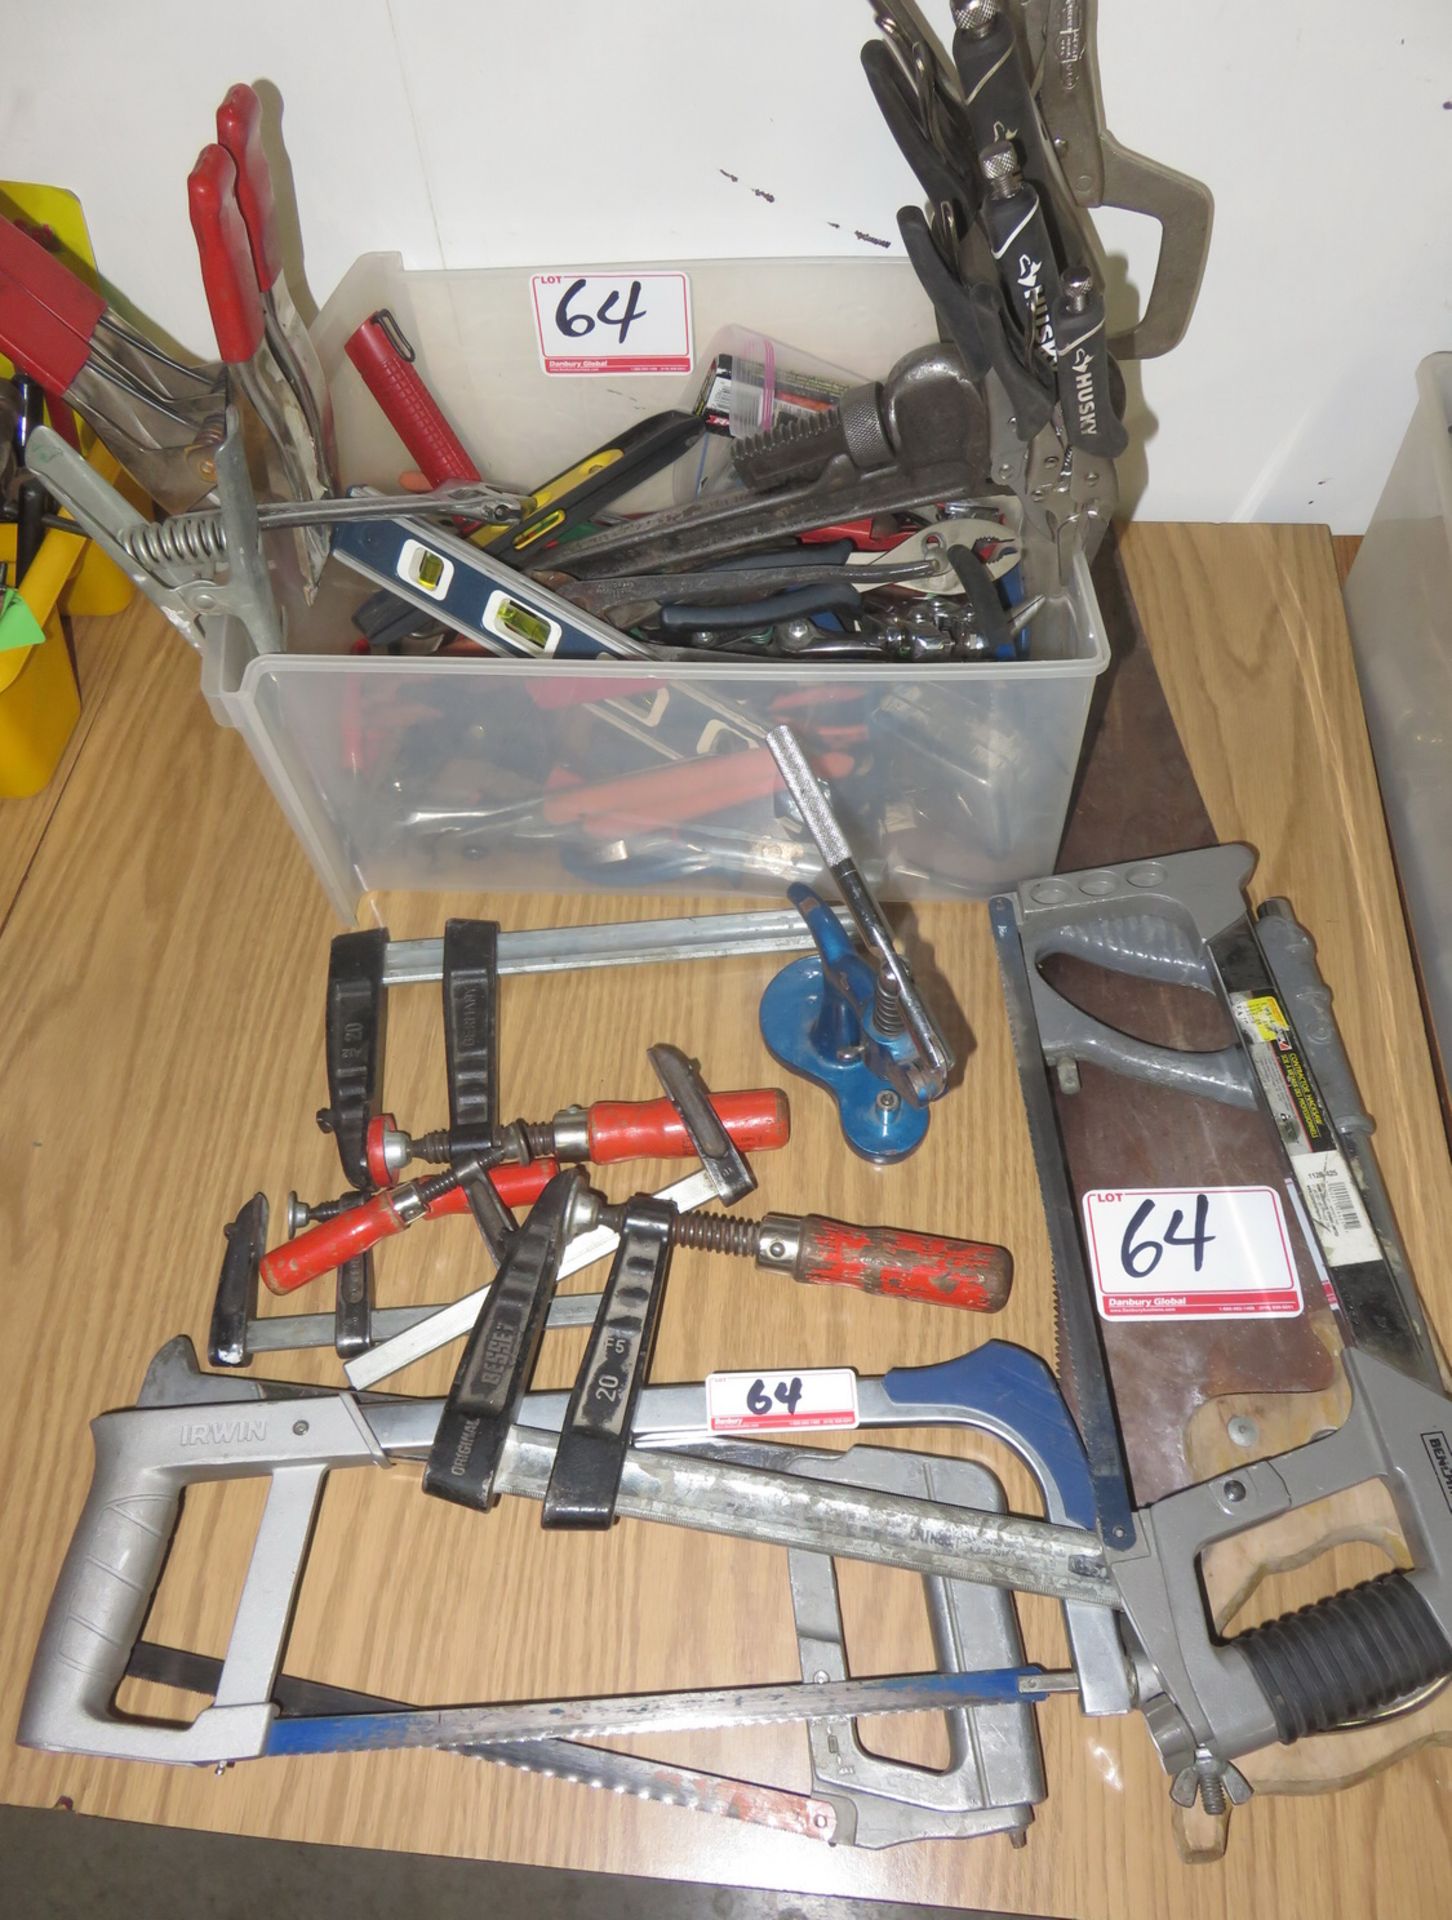 LOT - PLIERS, VISE GRIPS, CRESENT WRENCHES, SAWS + CLAMPS